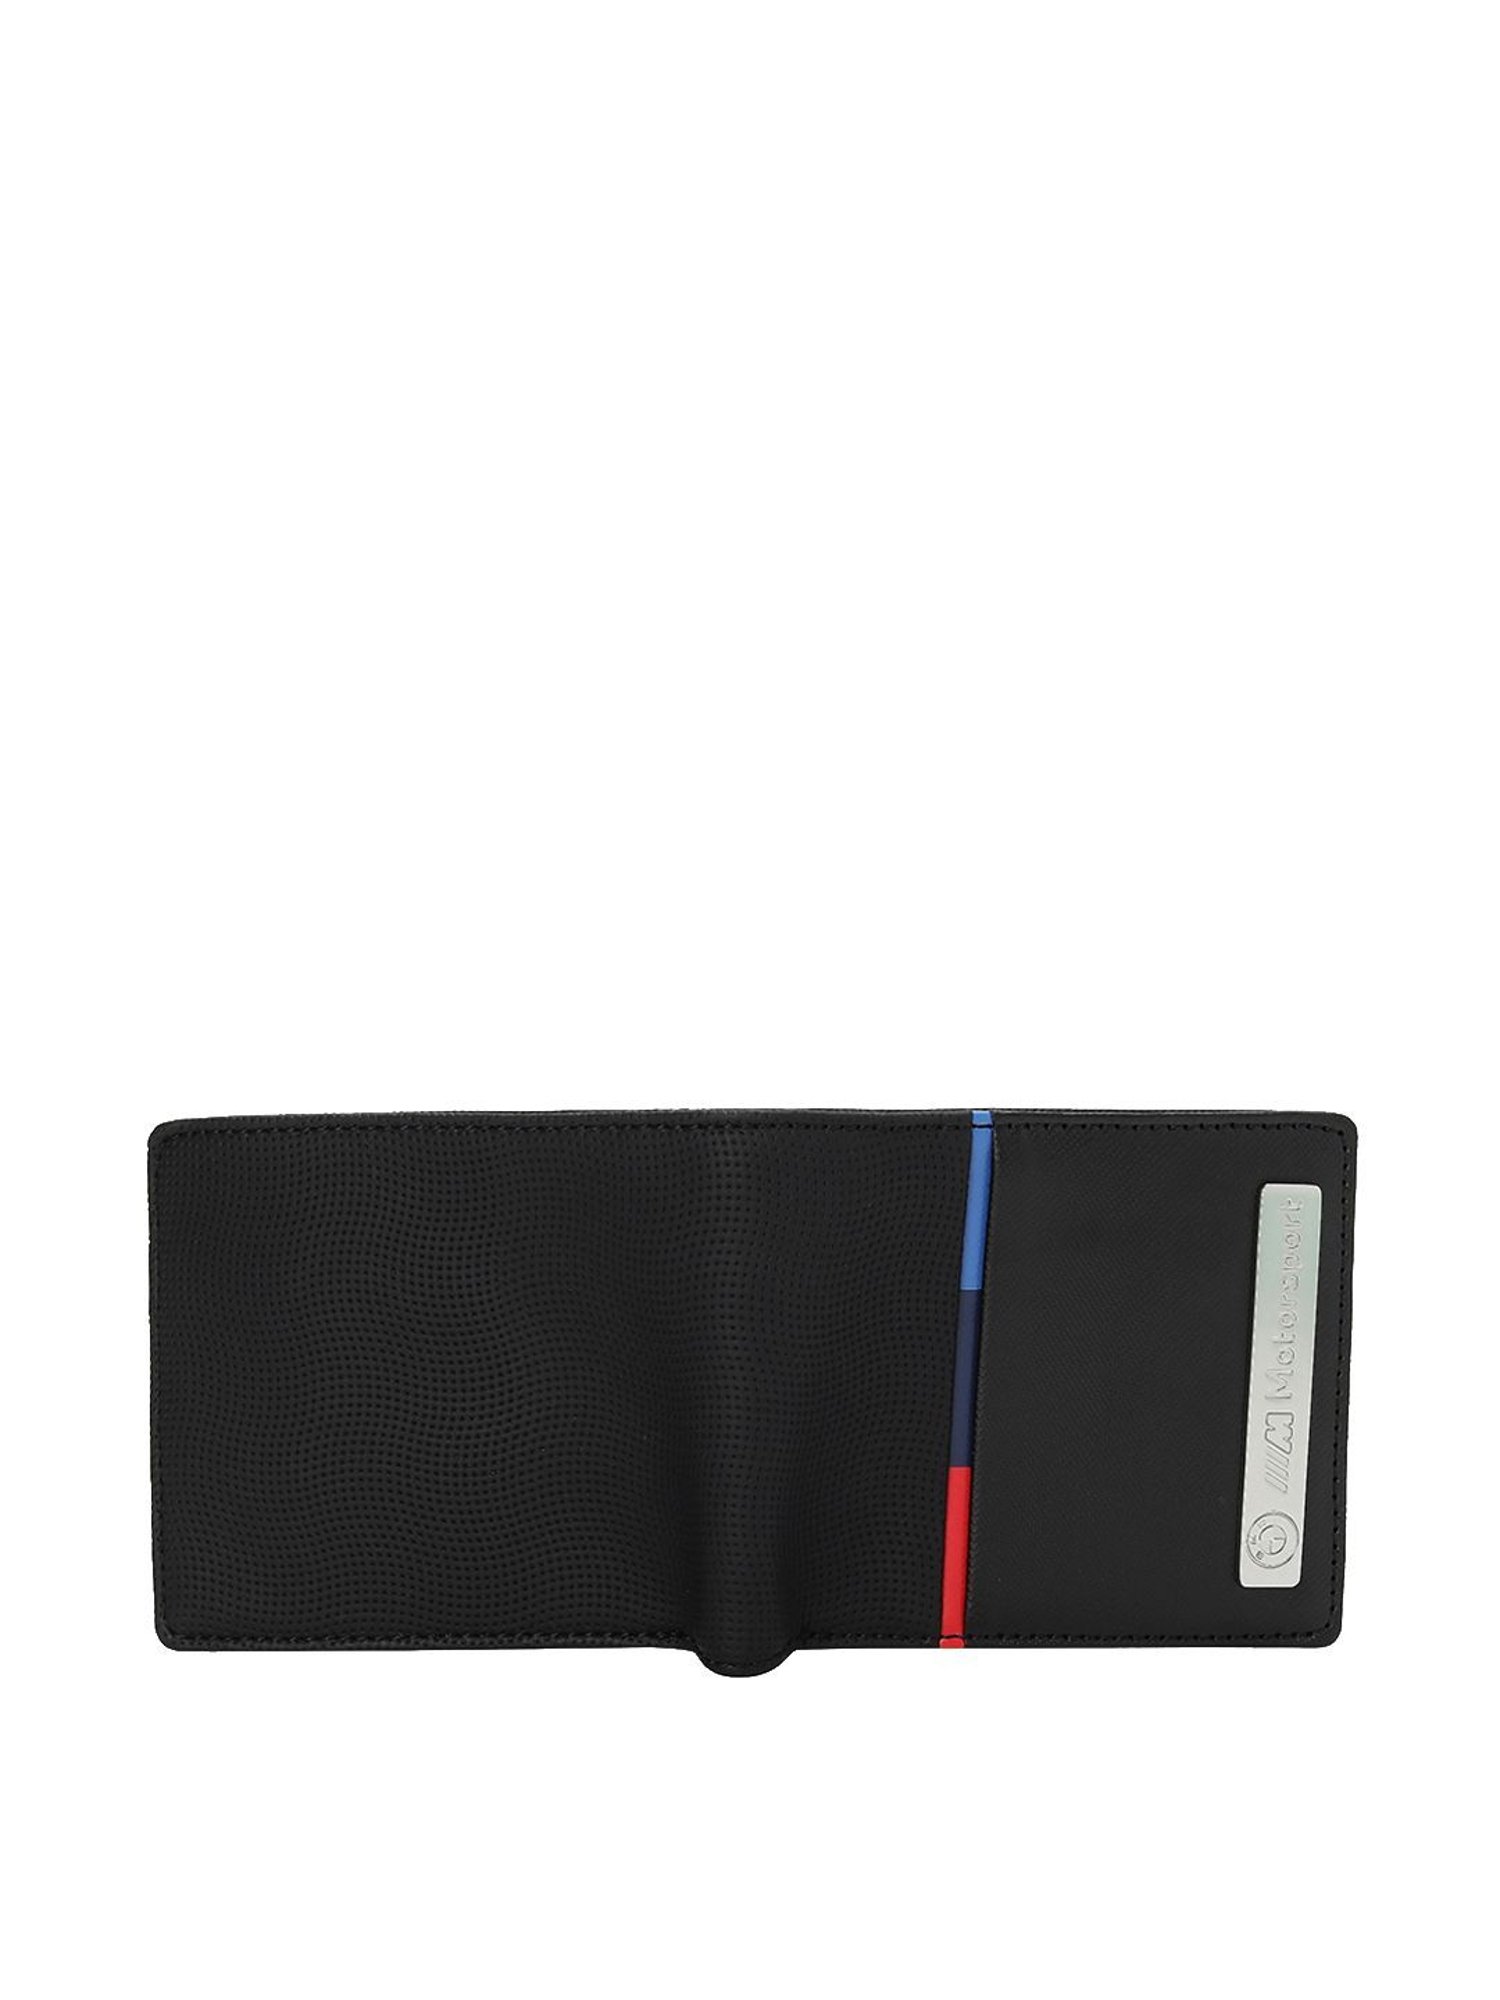 Buy Puma Polyester Unisex Travel Wallet (Black) at Amazon.in